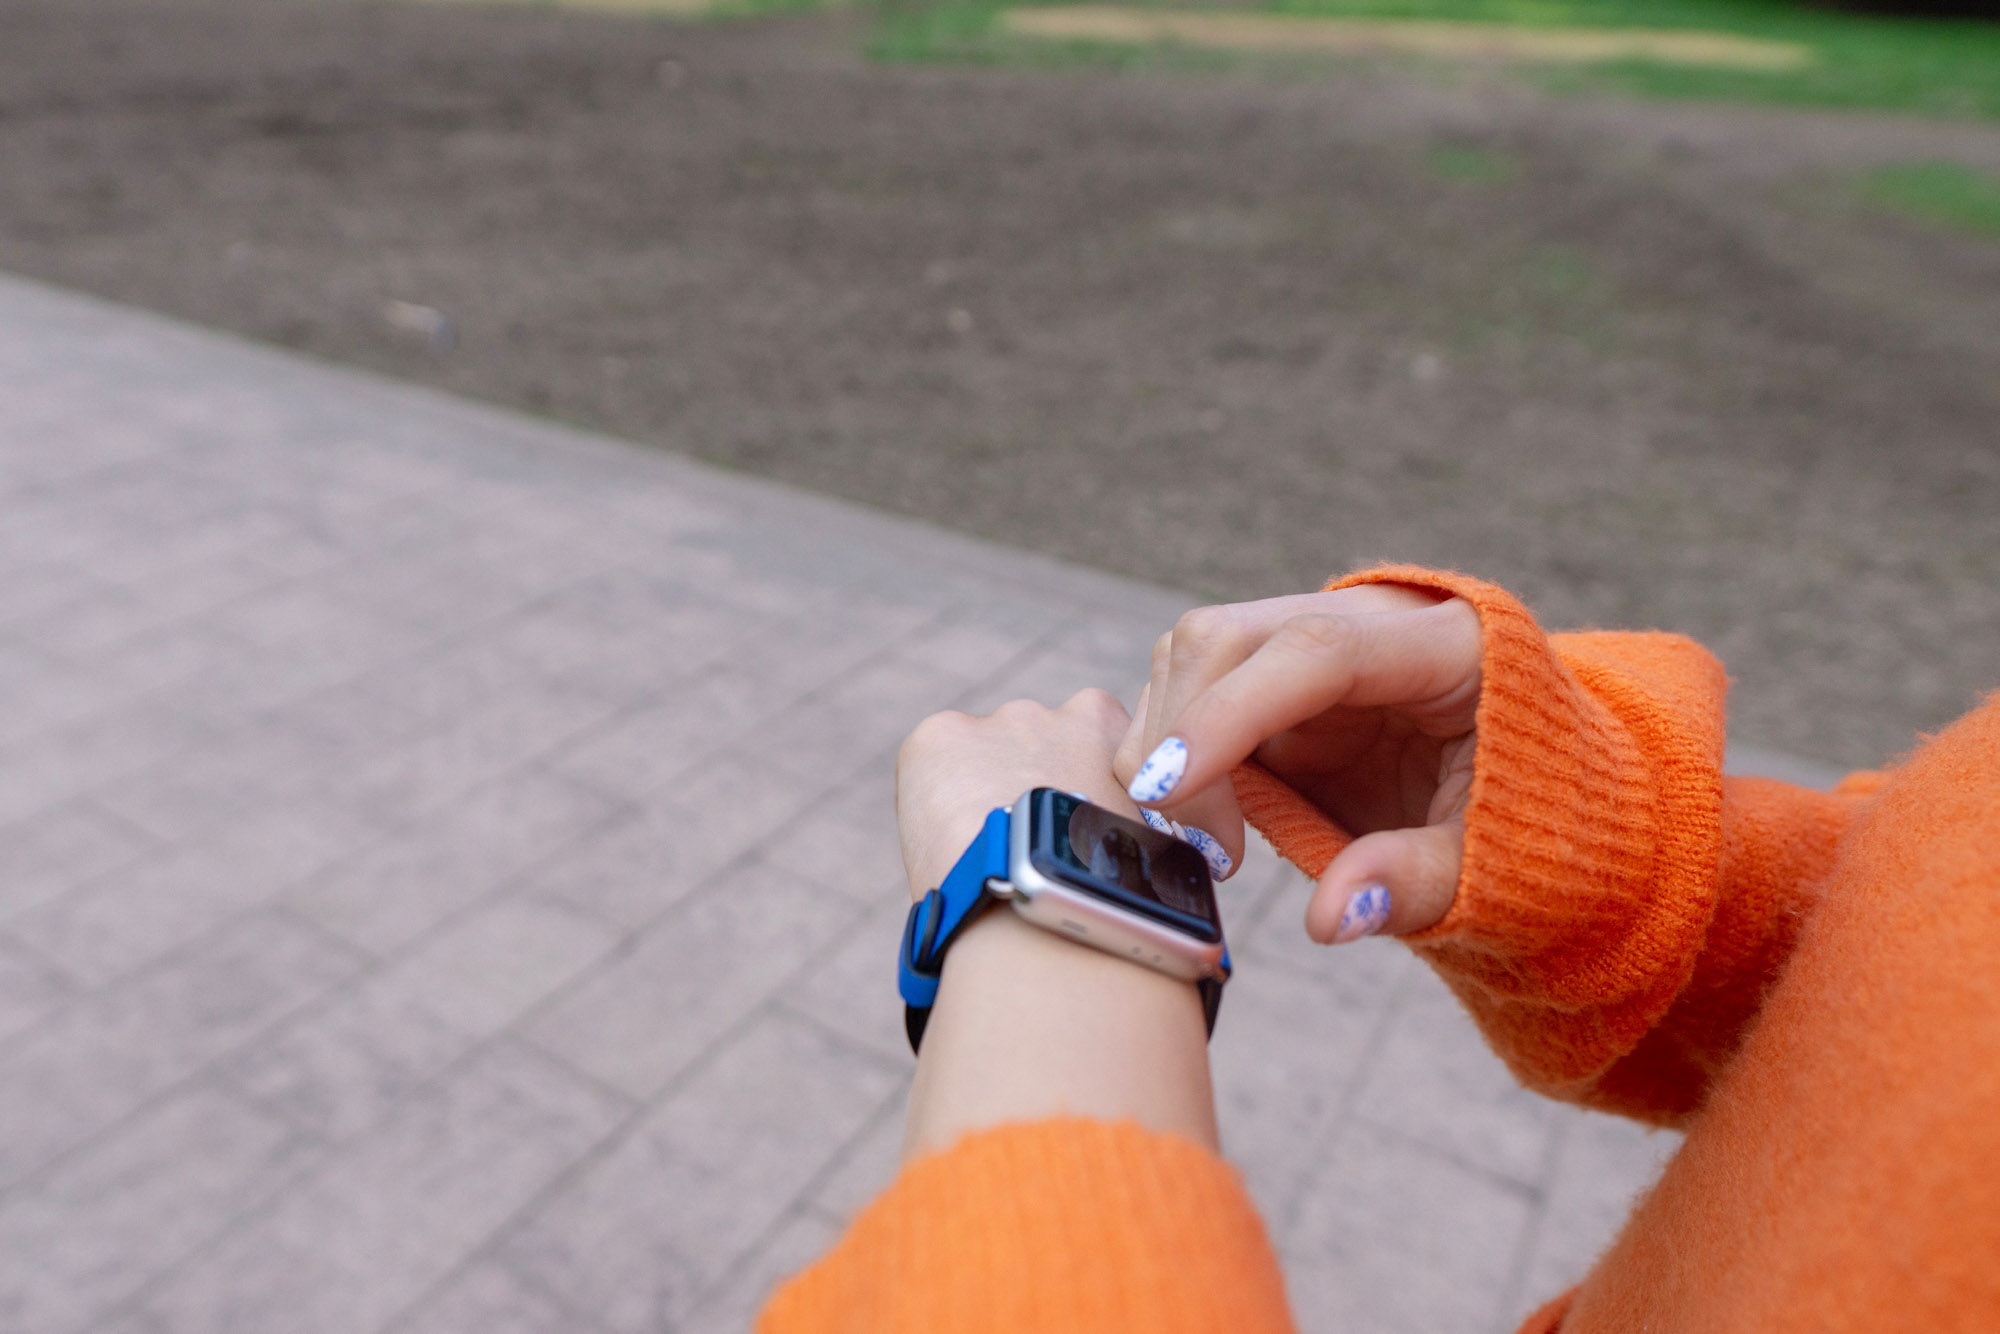 Close up of an Apple Watch on a womanâ€™s wrist. The watch has a bright blue band. The woman is about to tap on the screen of the watch with her opposite hand.